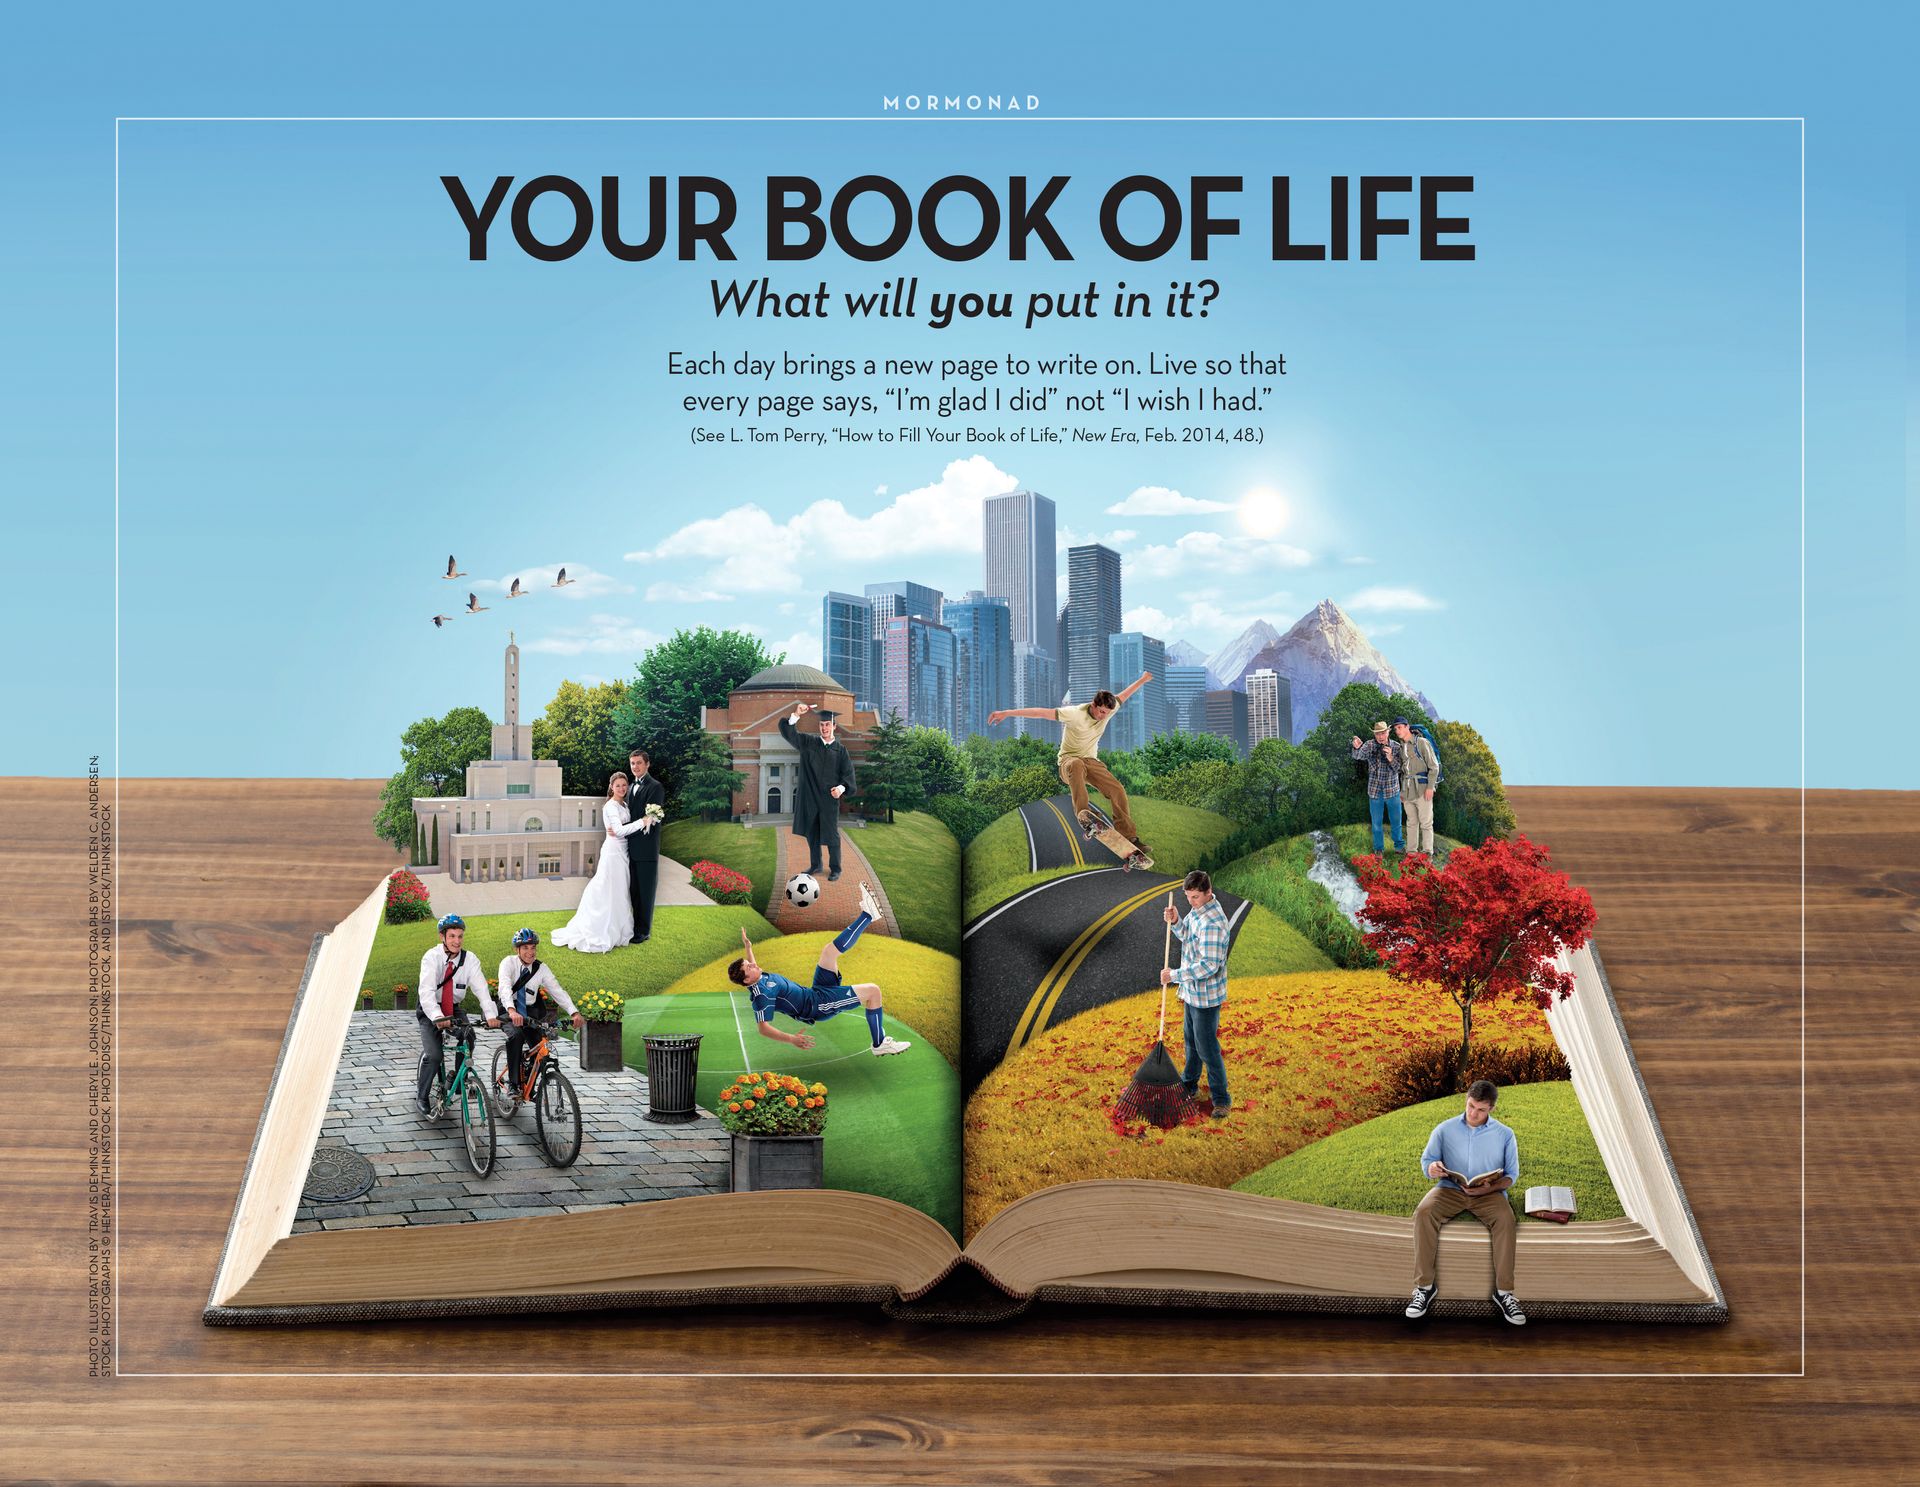 Your Book of Life. What will you put in it? Each day brings a new page to write on. Live so that every page says, “I’m glad I did” not “I wish I had.” (See L. Tom Perry, "How to Fill Your Book of Life," New Era, Feb. 2014, 48.) Oct. 2015 © undefined ipCode 1.